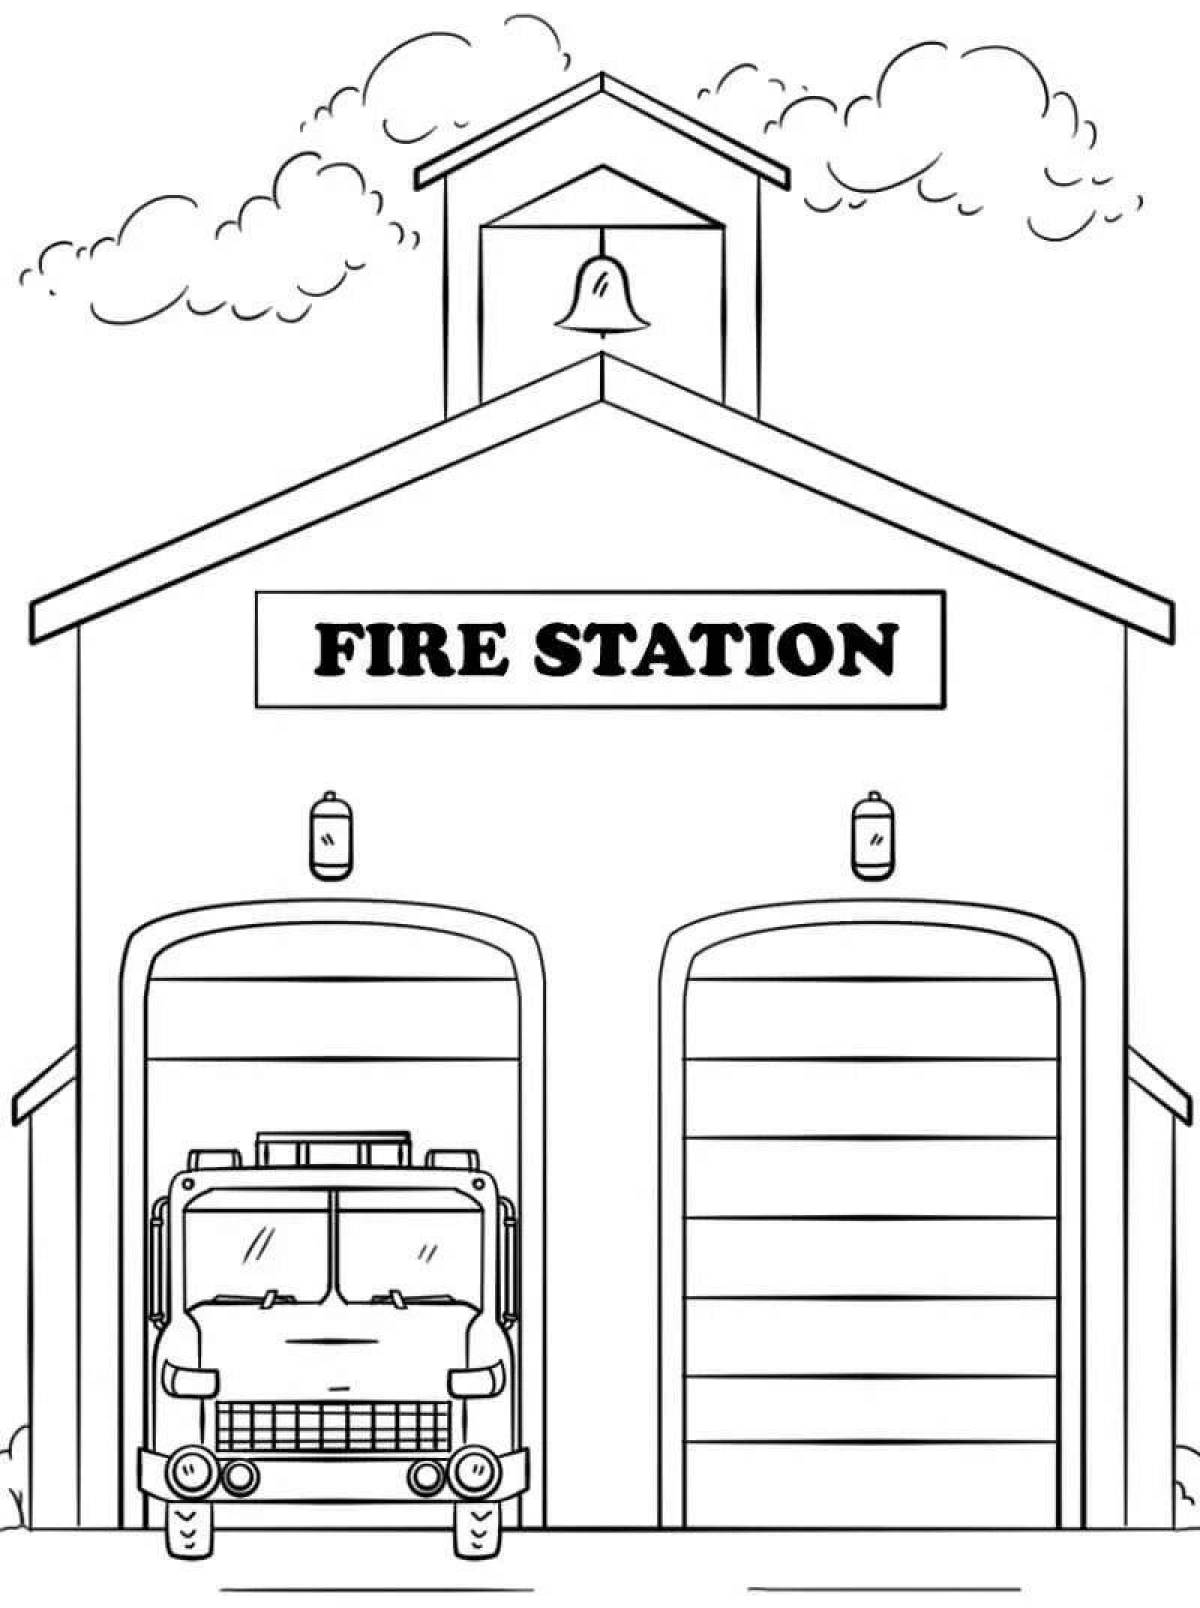 Animated fire station coloring page